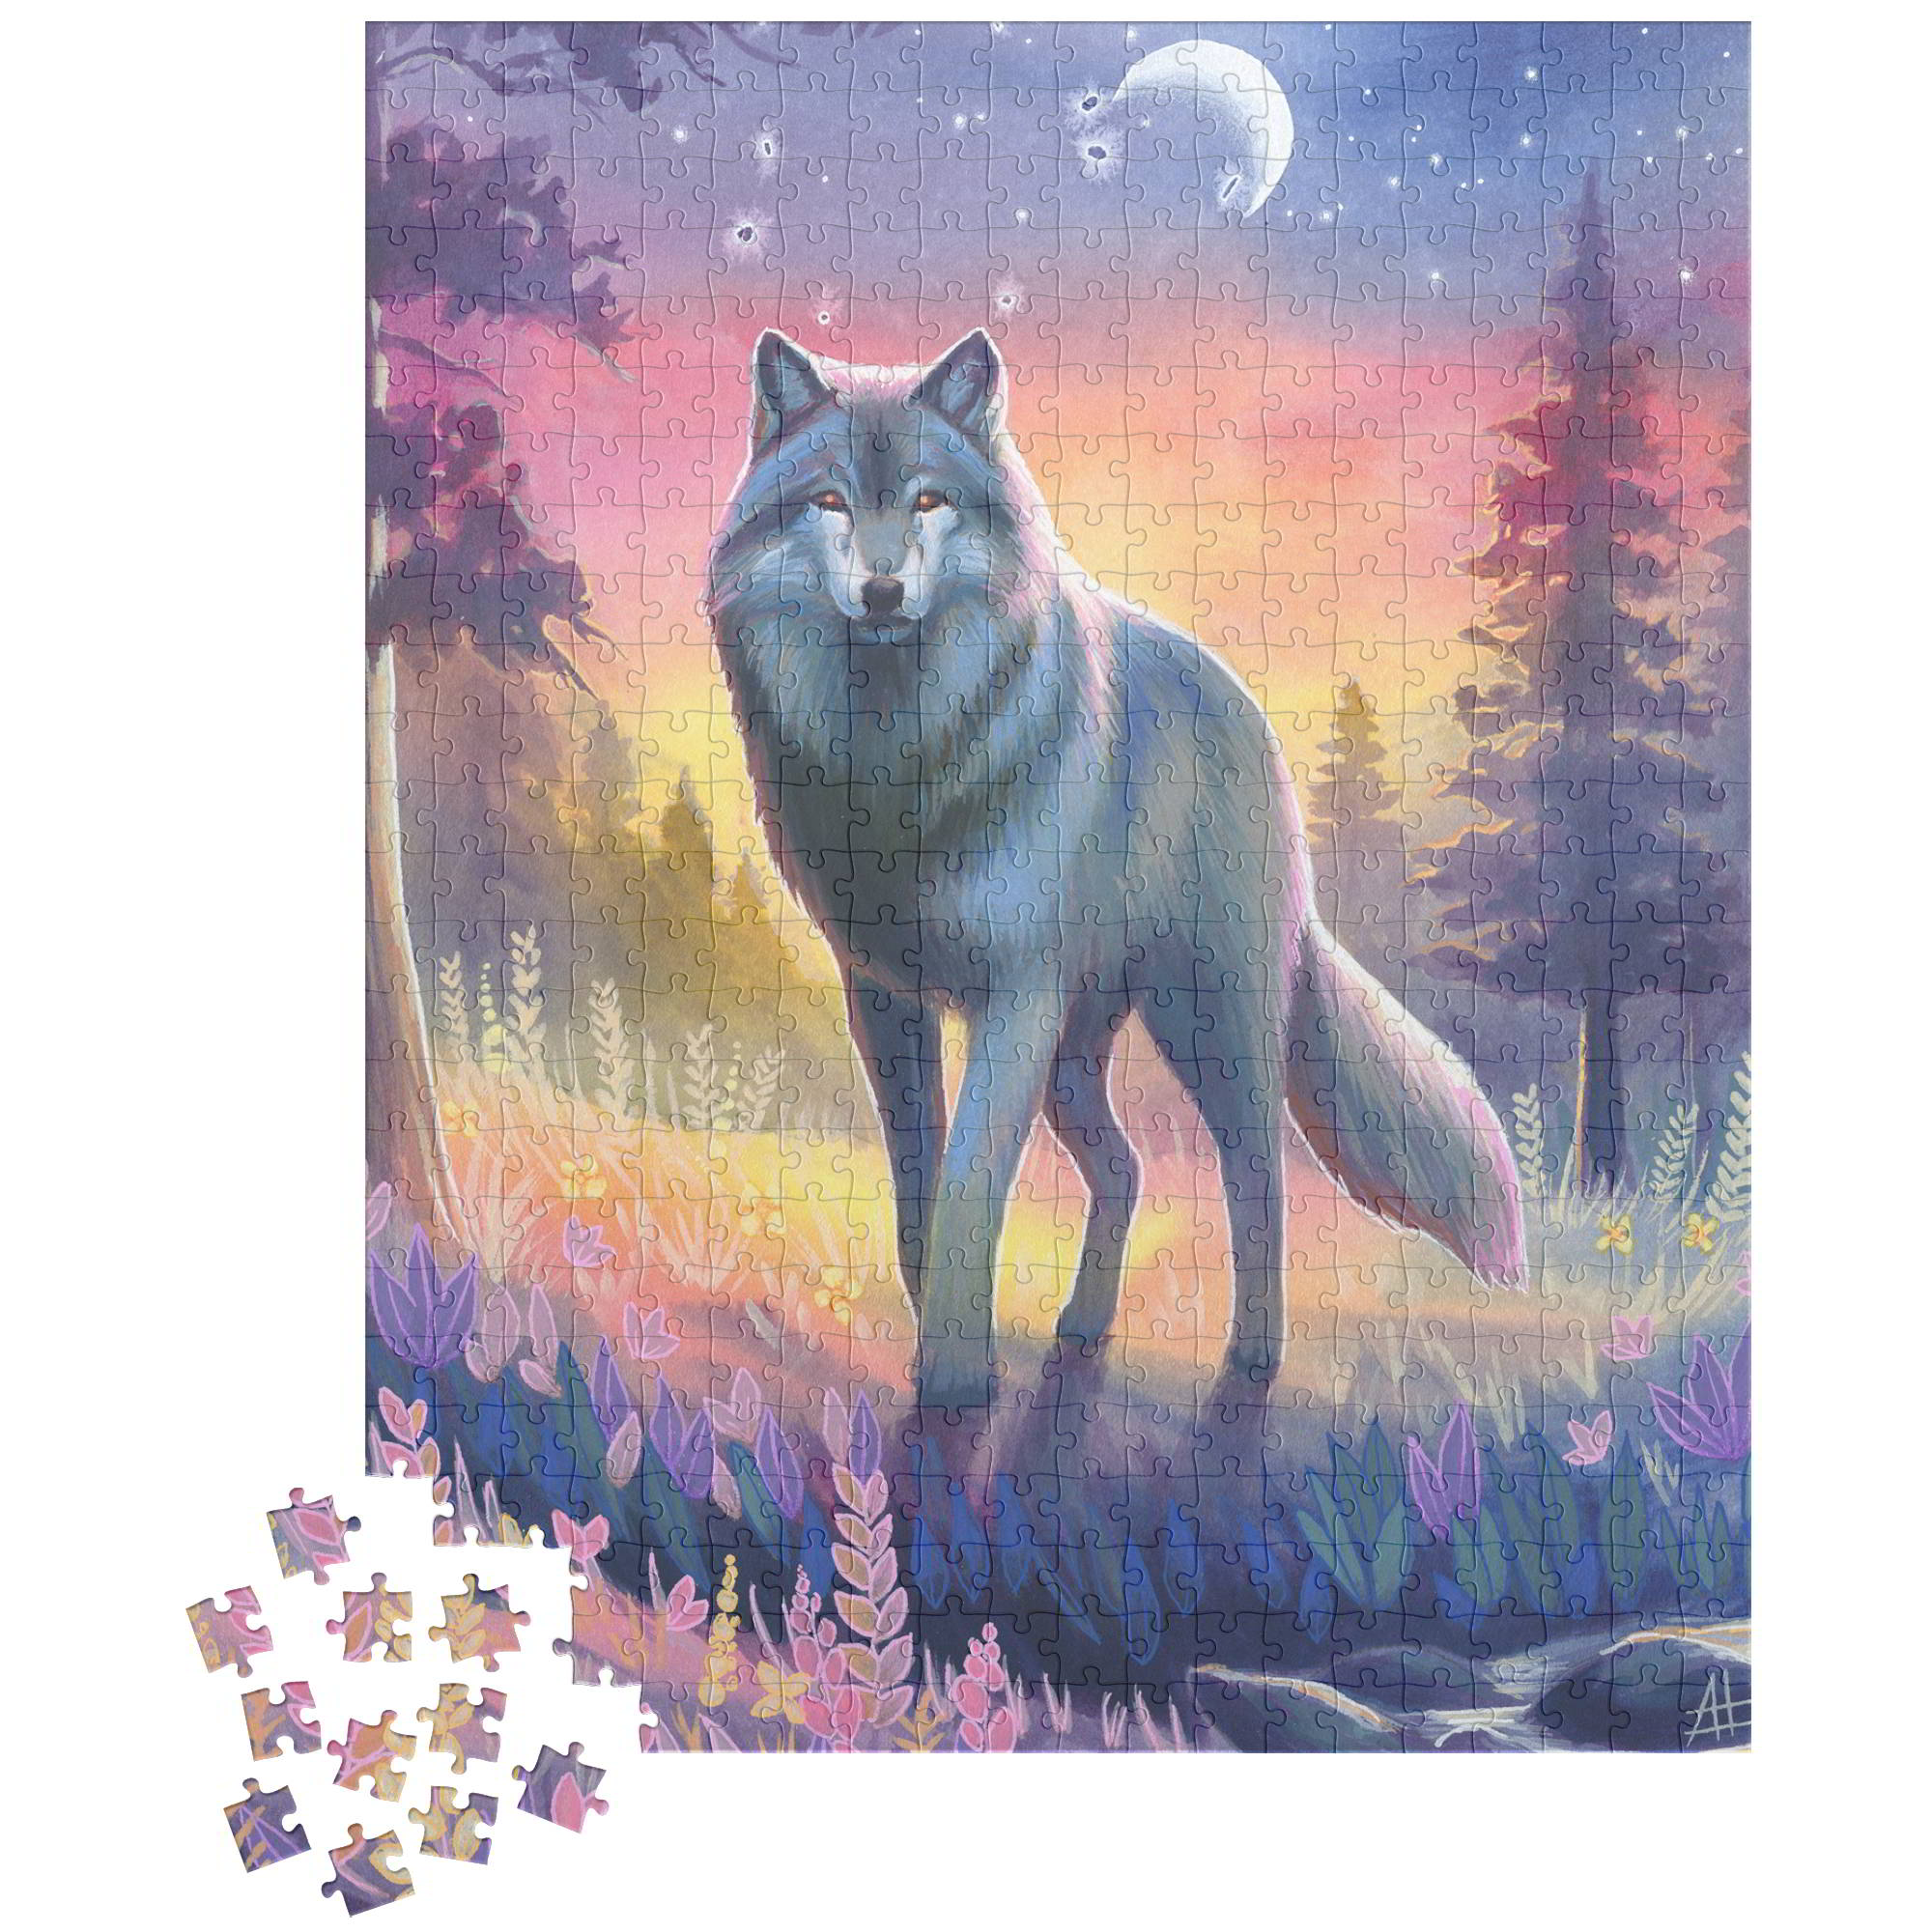 Nearly completed Wolf Puzzle depicting a wolf in a colorful forest setting at sunset, with loose pieces around the edges.